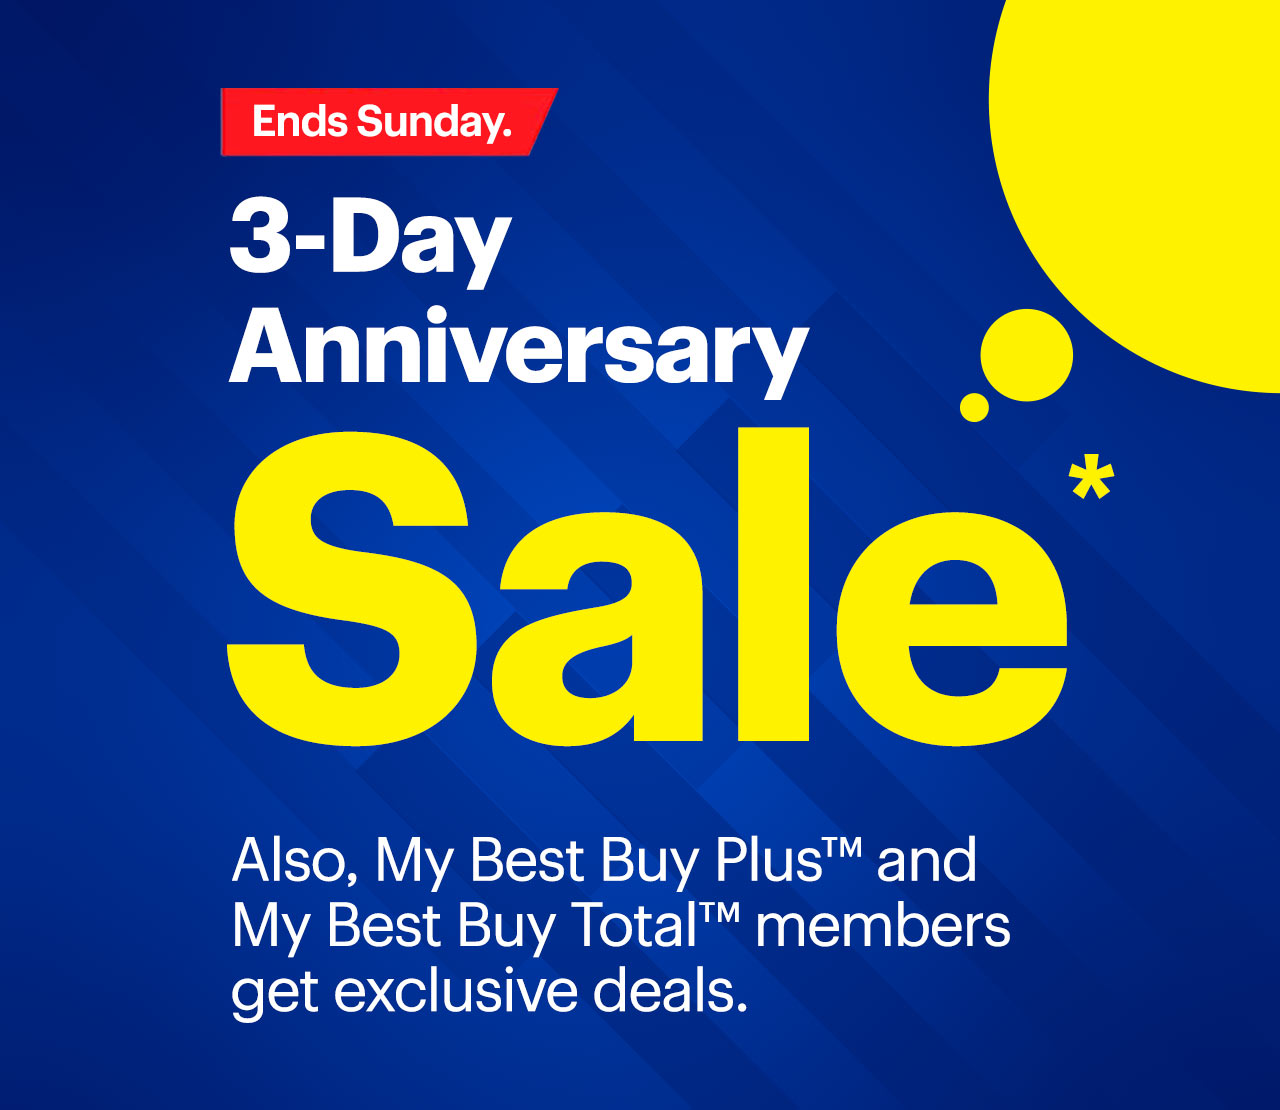 Anniversary 3-Day Sale. Also, My Best Buy Plus™ and My Best Buy Total™ members get exclusive deals. Ends Sunday. Reference disclaimer.